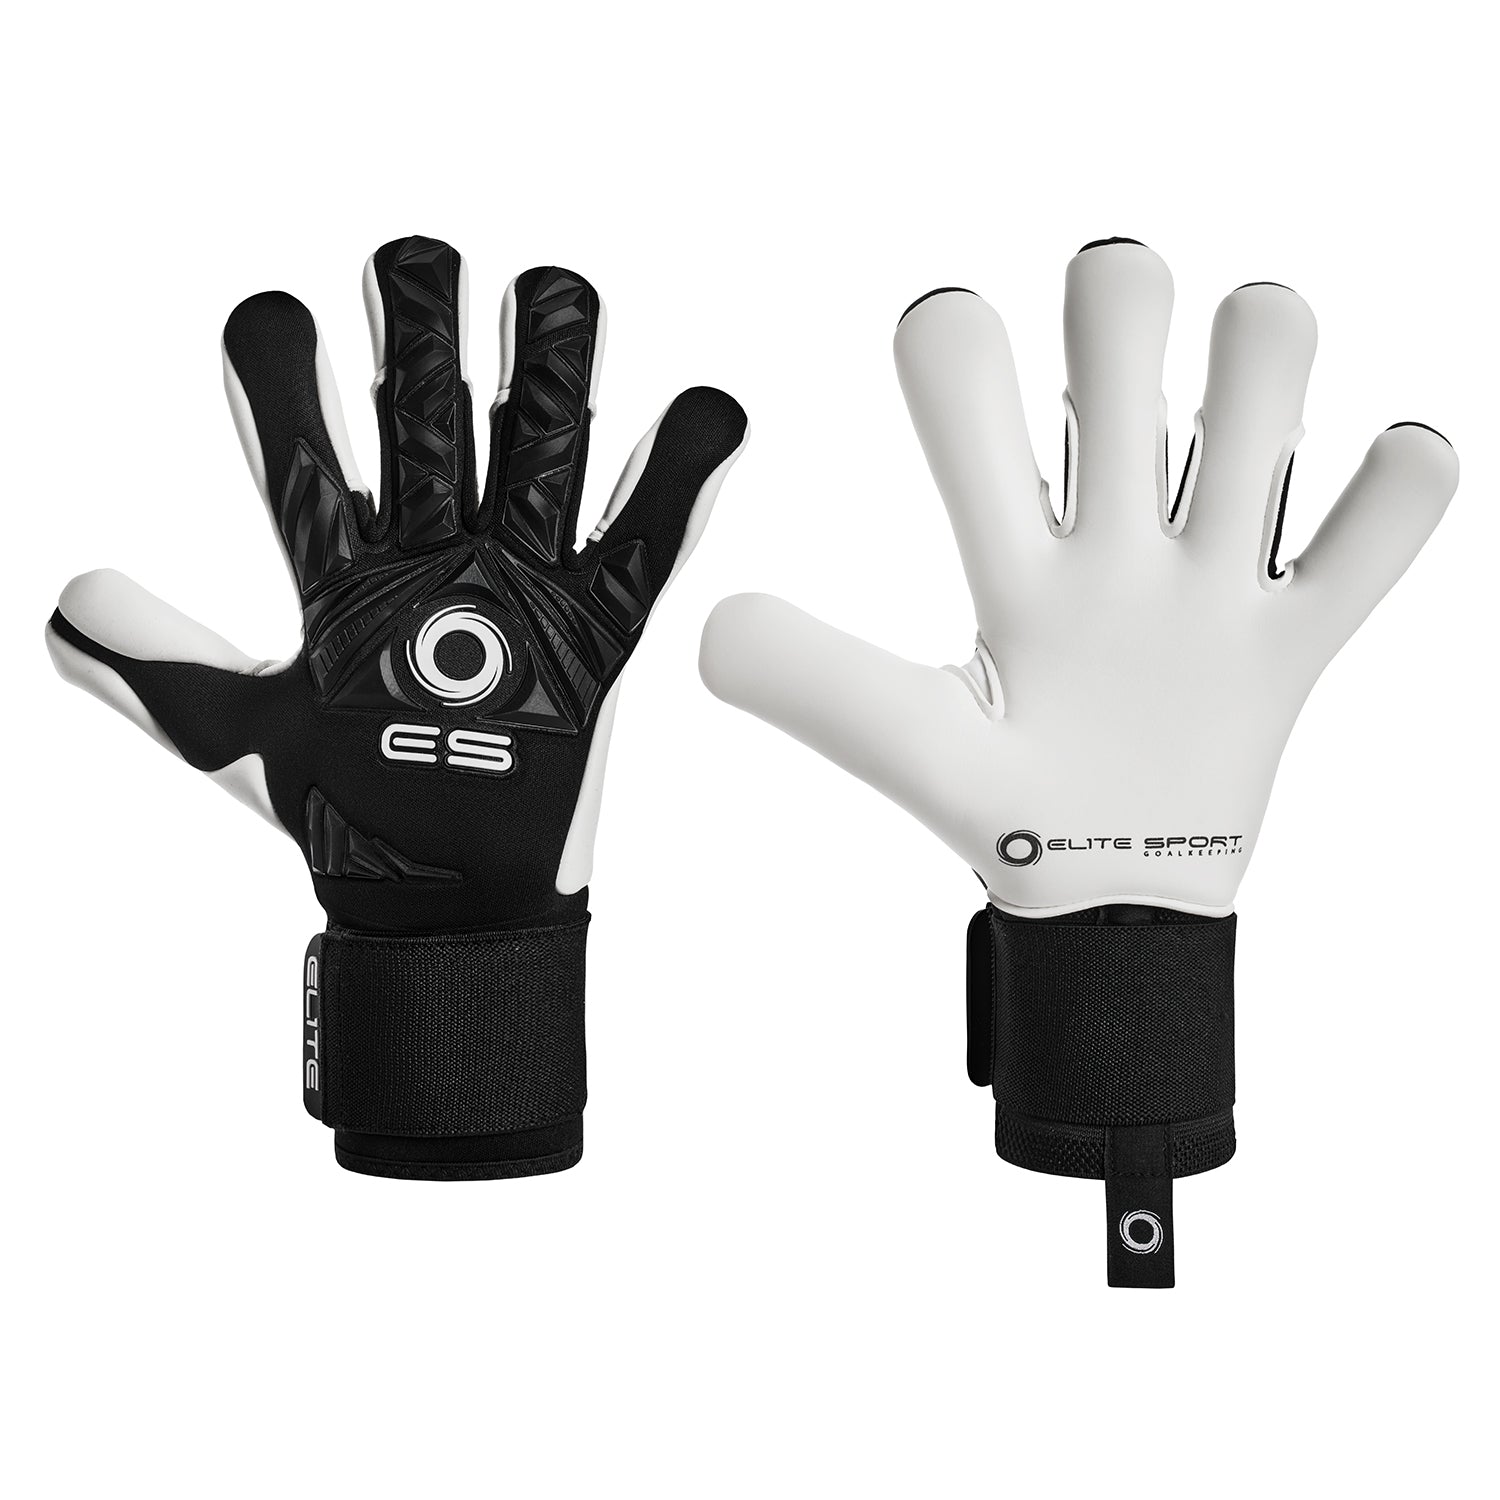 Why Every Football Player Needs Goalkeeper Finger Protection Gloves